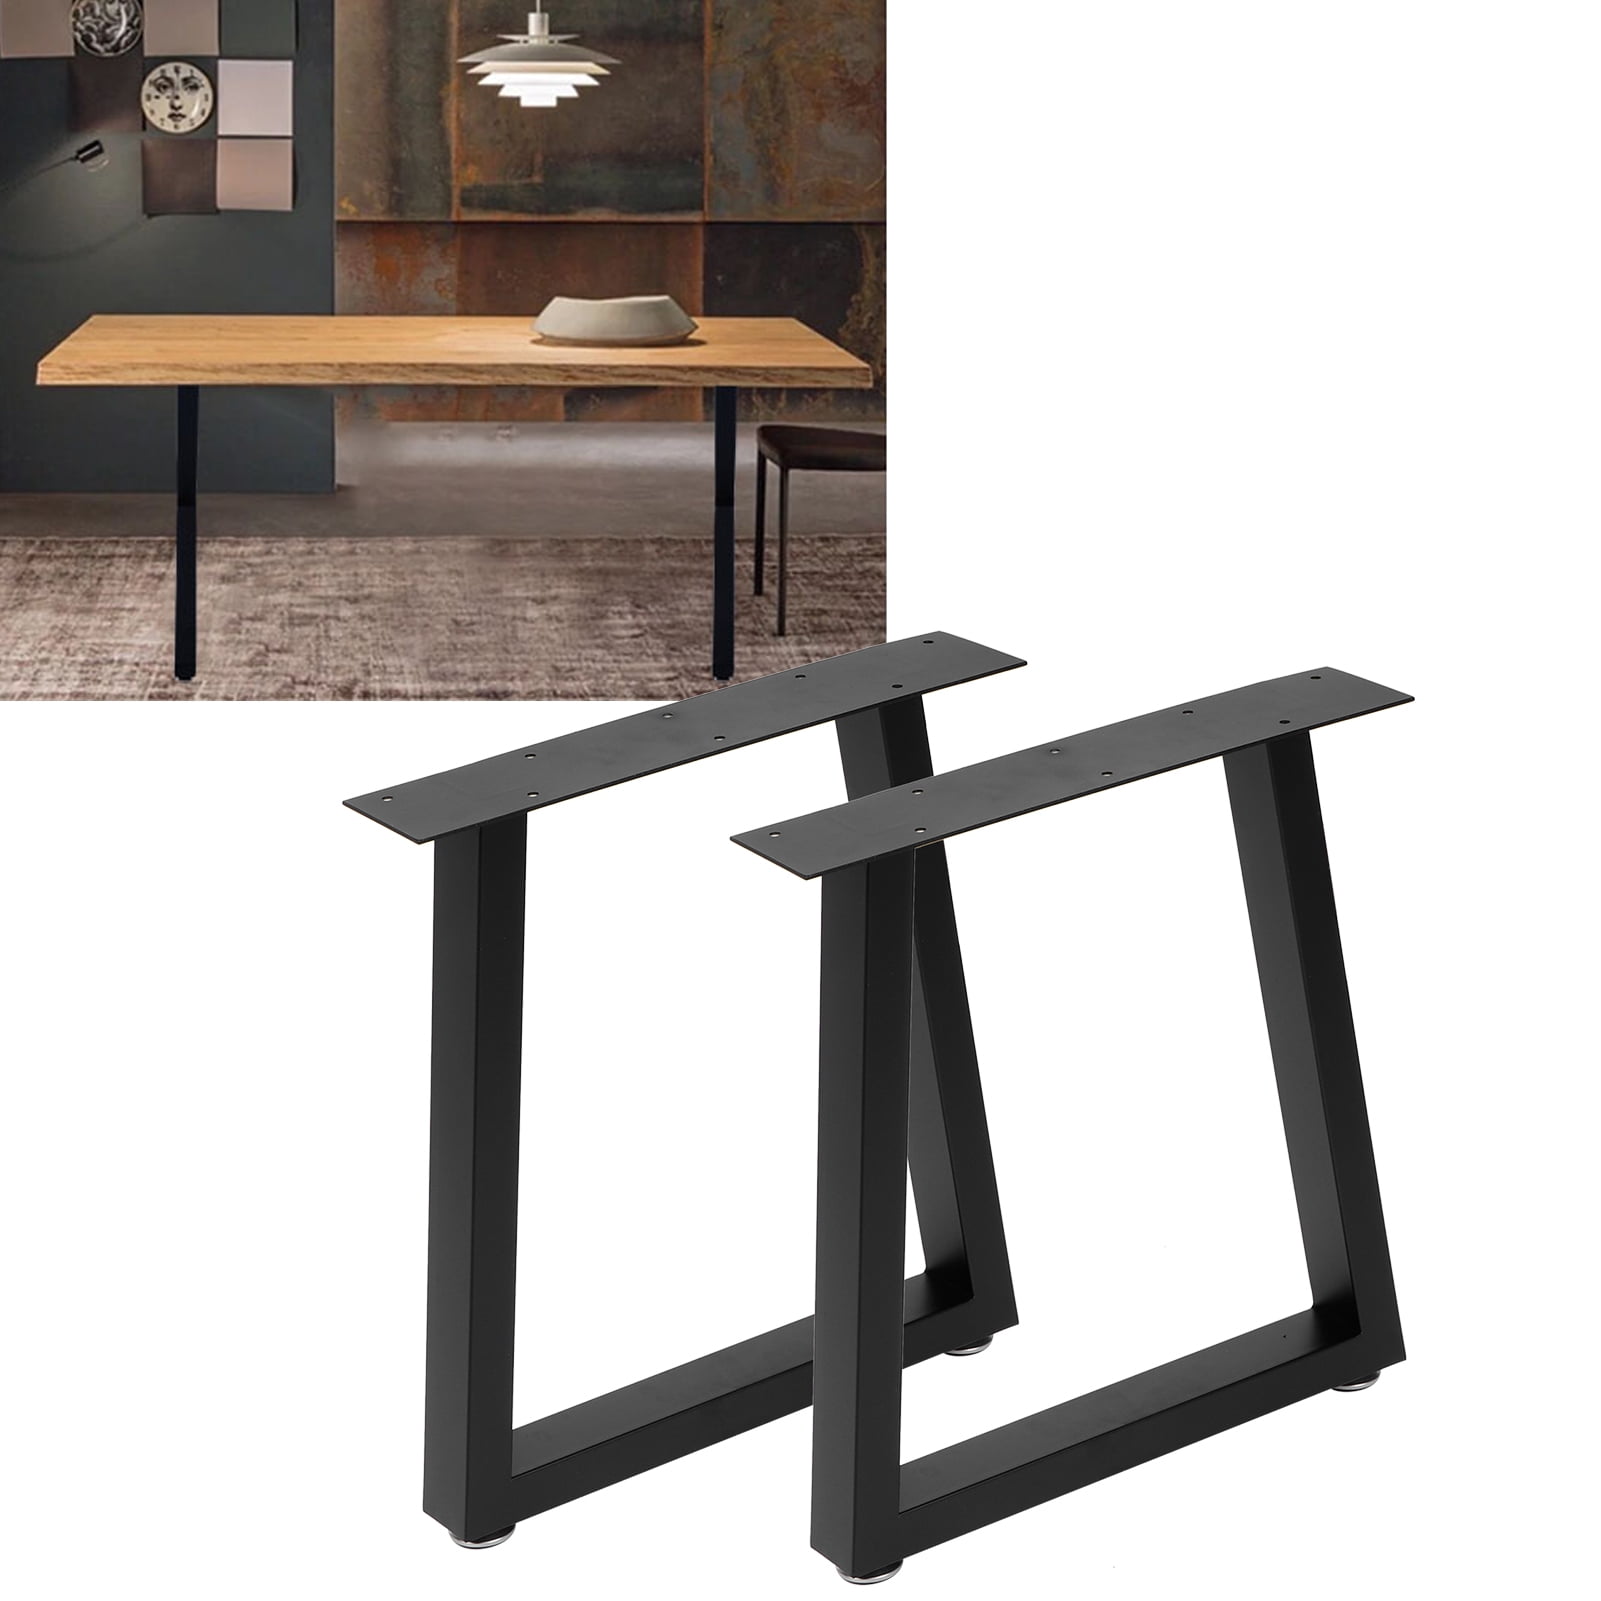 Details about   New Fashion Steel Desk Table Furniture Legs Bracket Home Table Accessories 